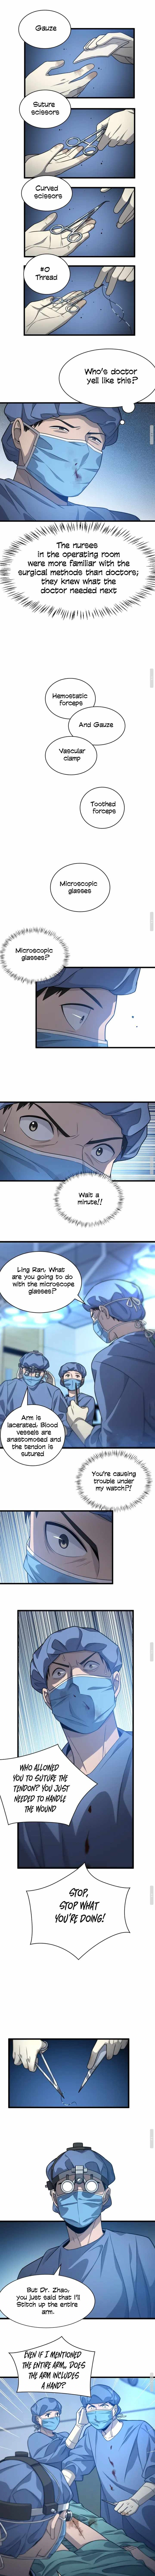 great_doctor_ling_ran_21_6